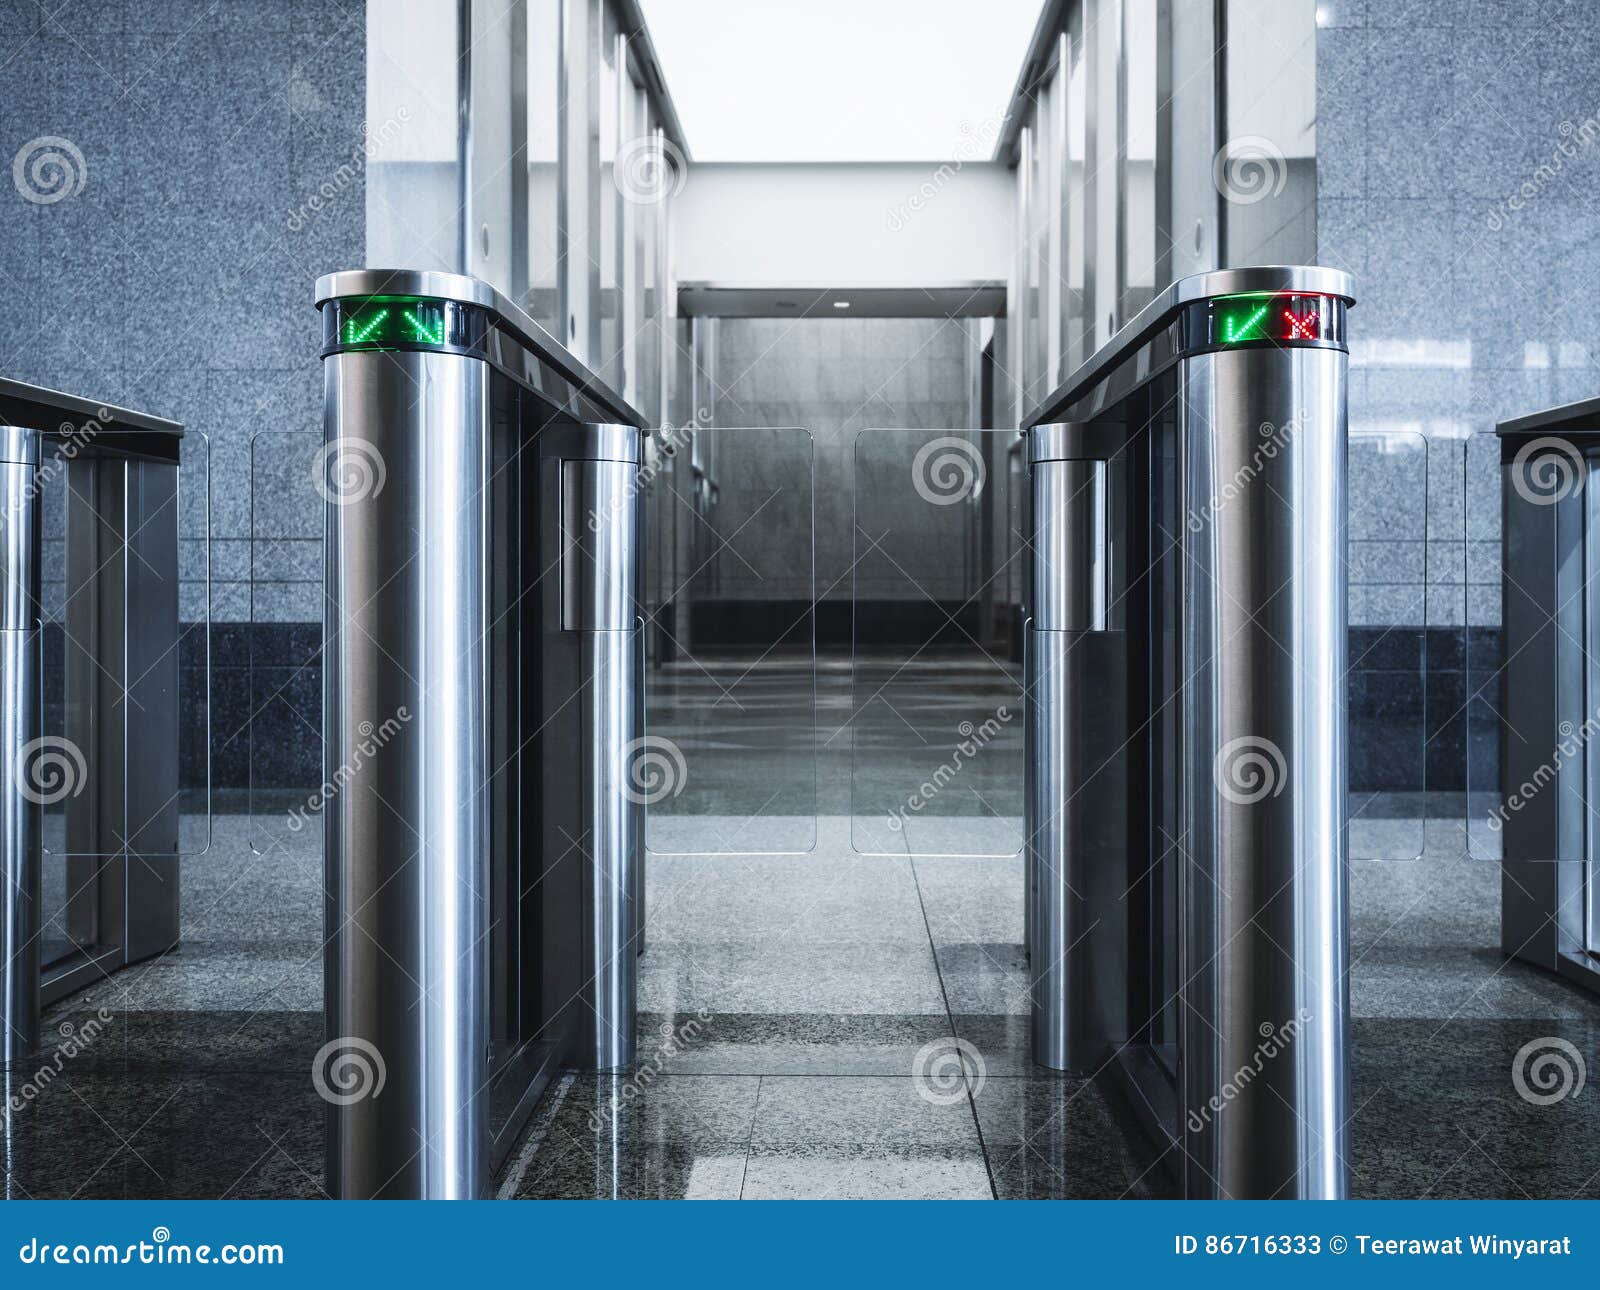 entrance gate card access security system office building